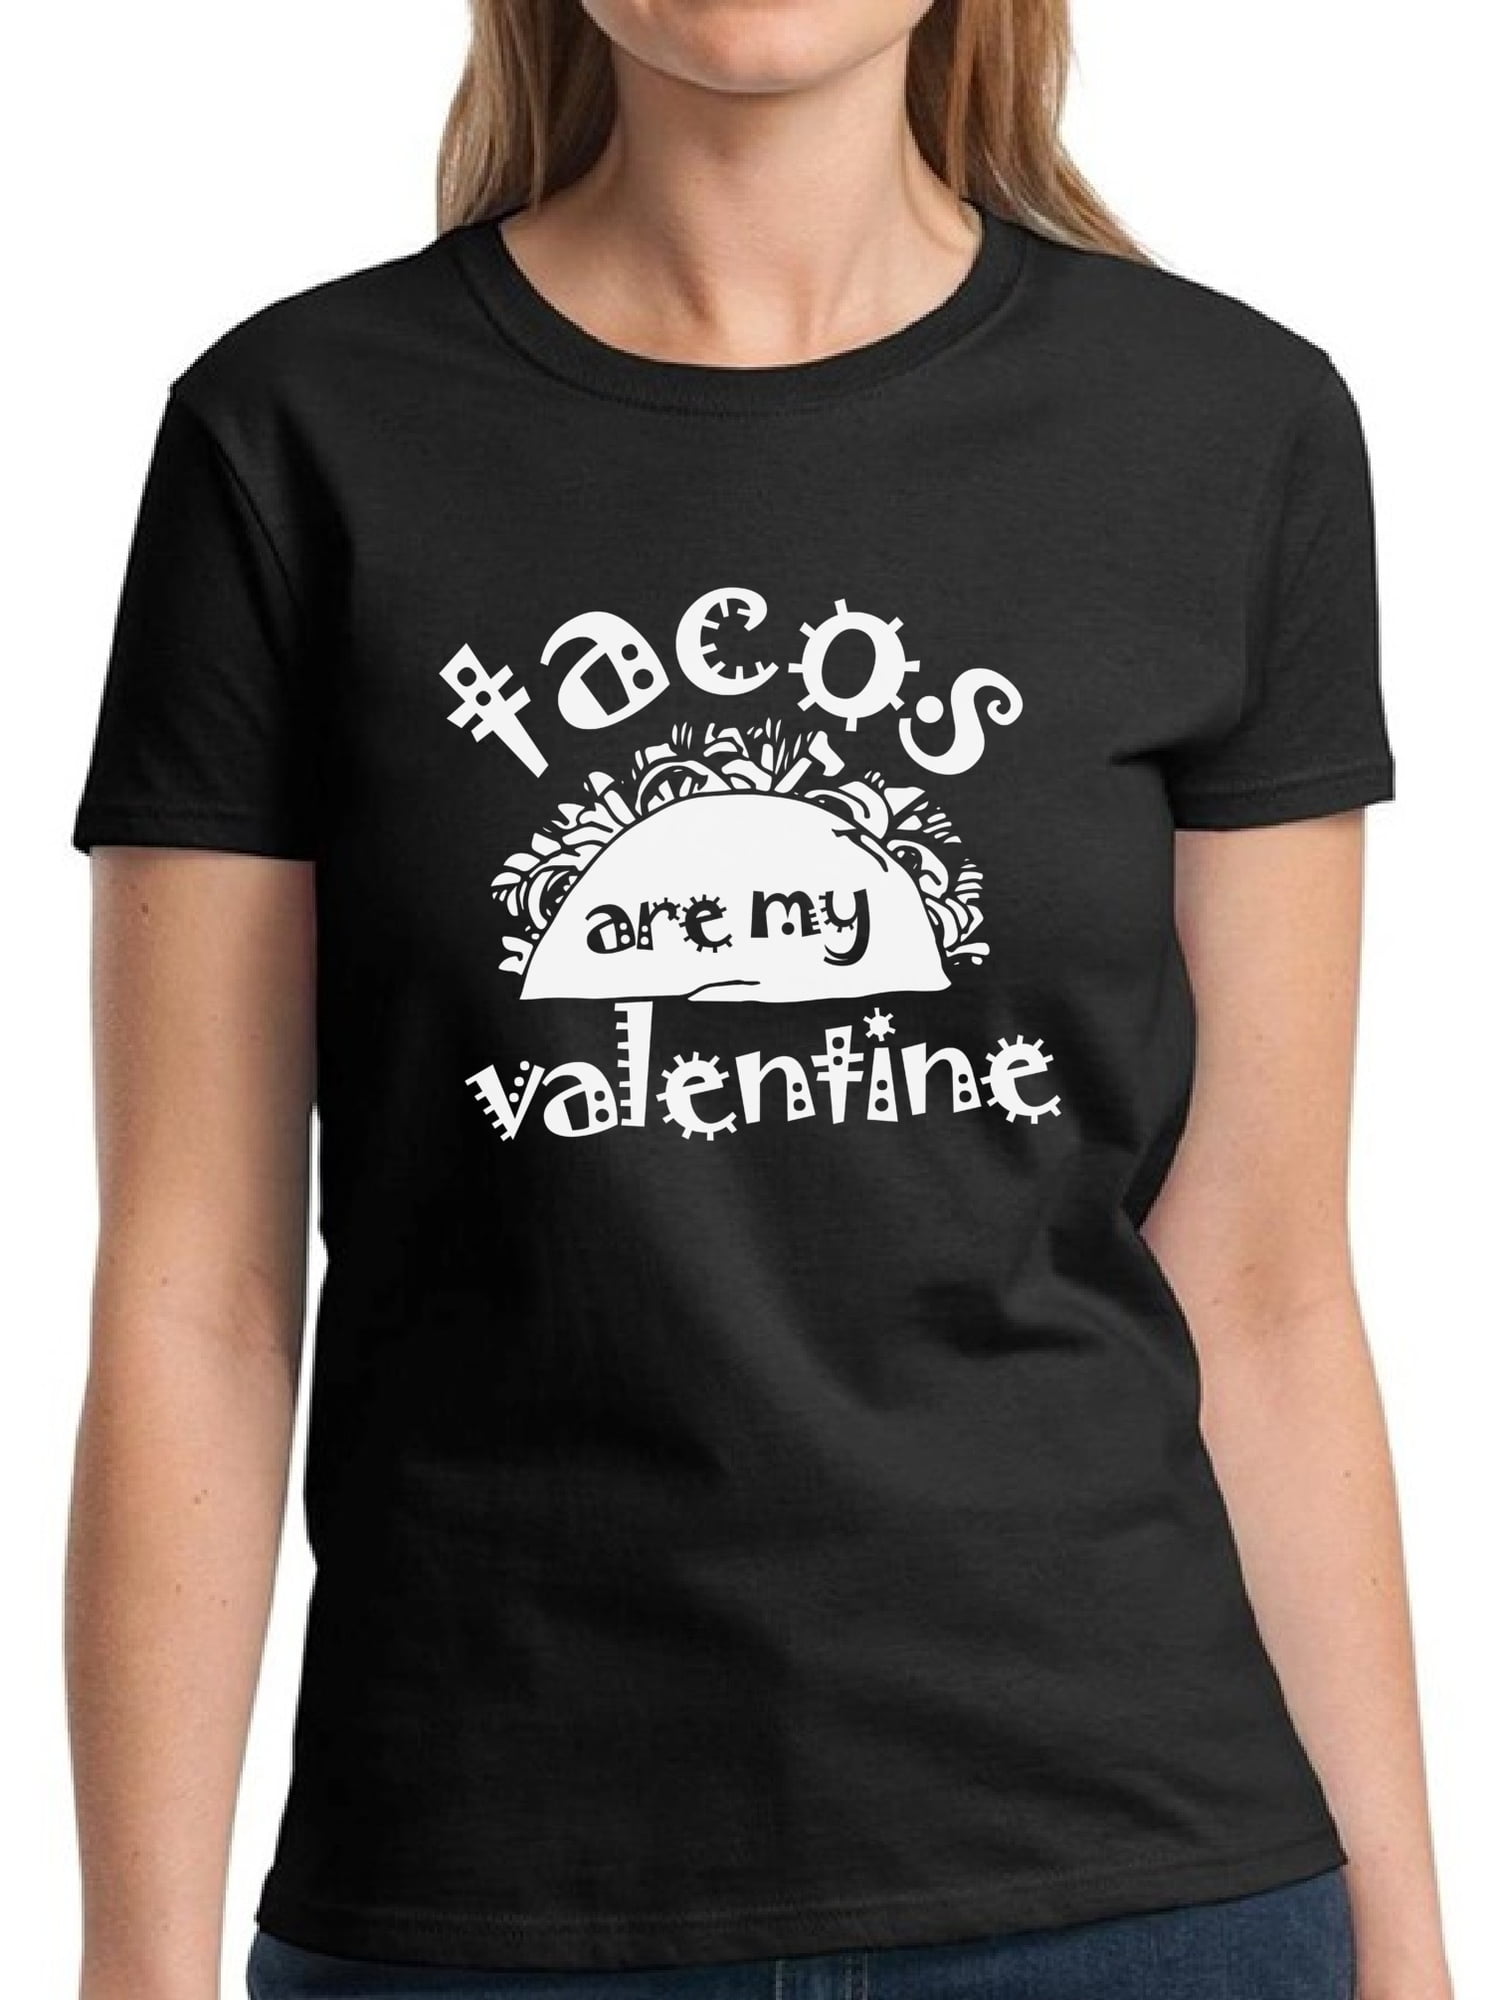 Tacos are My Valentine Sweatshirt Taco Sweater for Singles Valentine's Day Gifts 